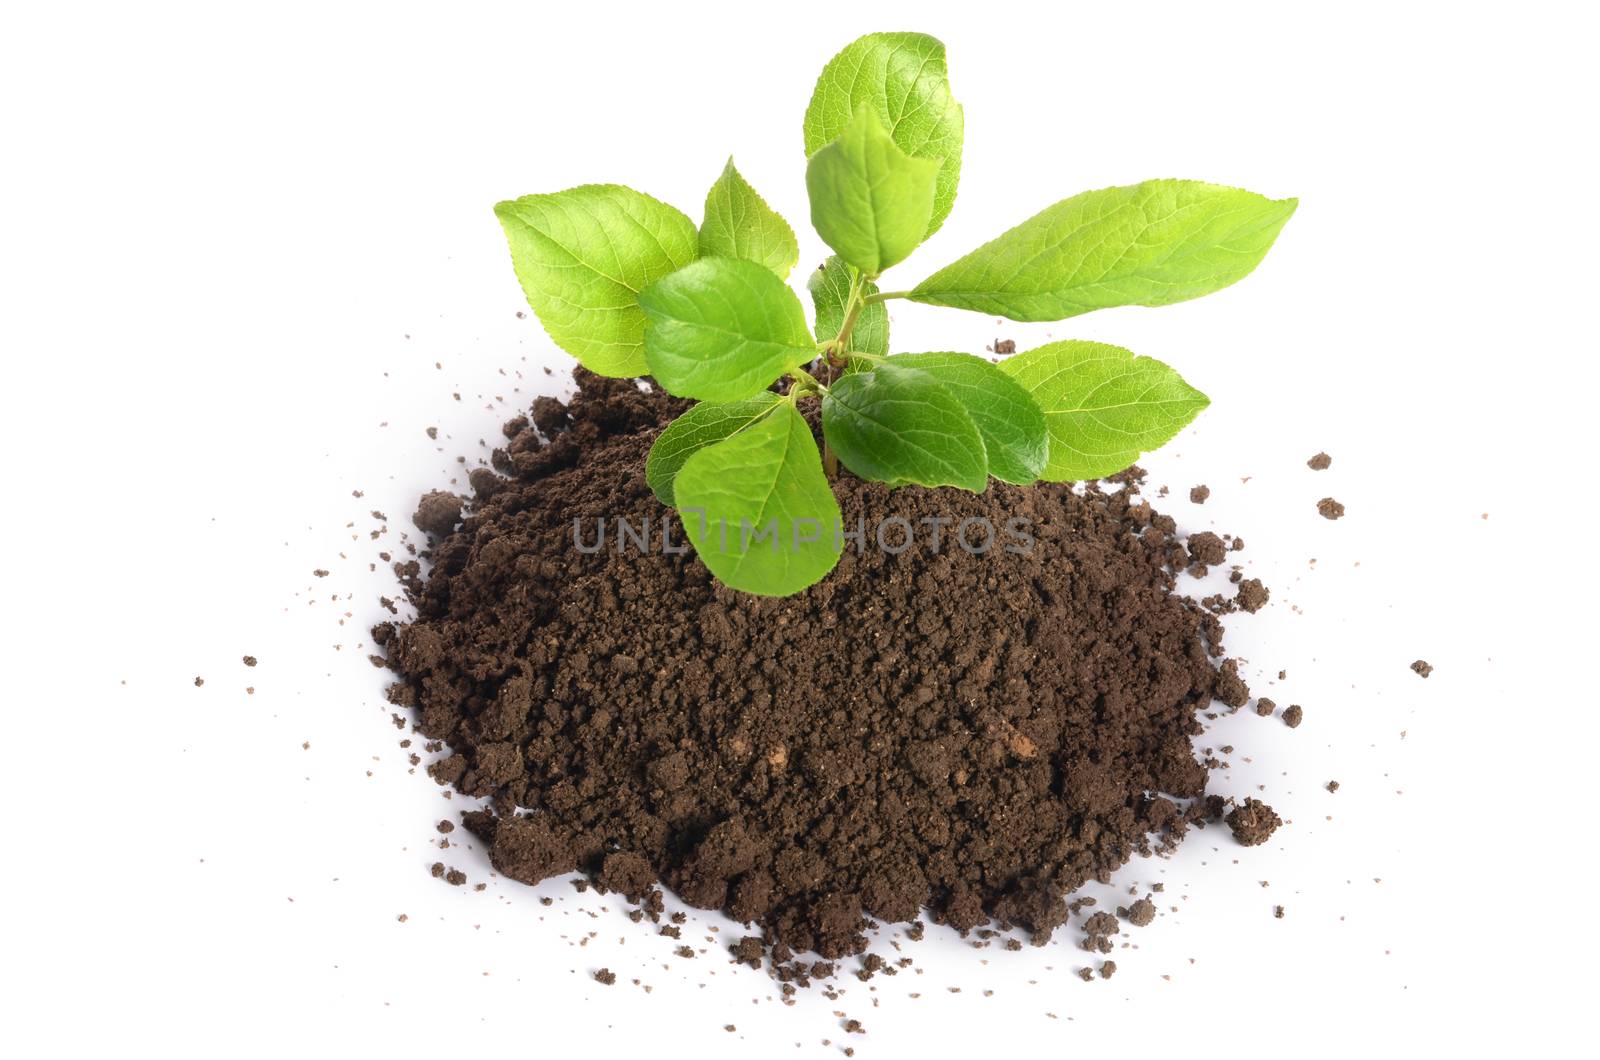 Plant growing in soil isolated on white